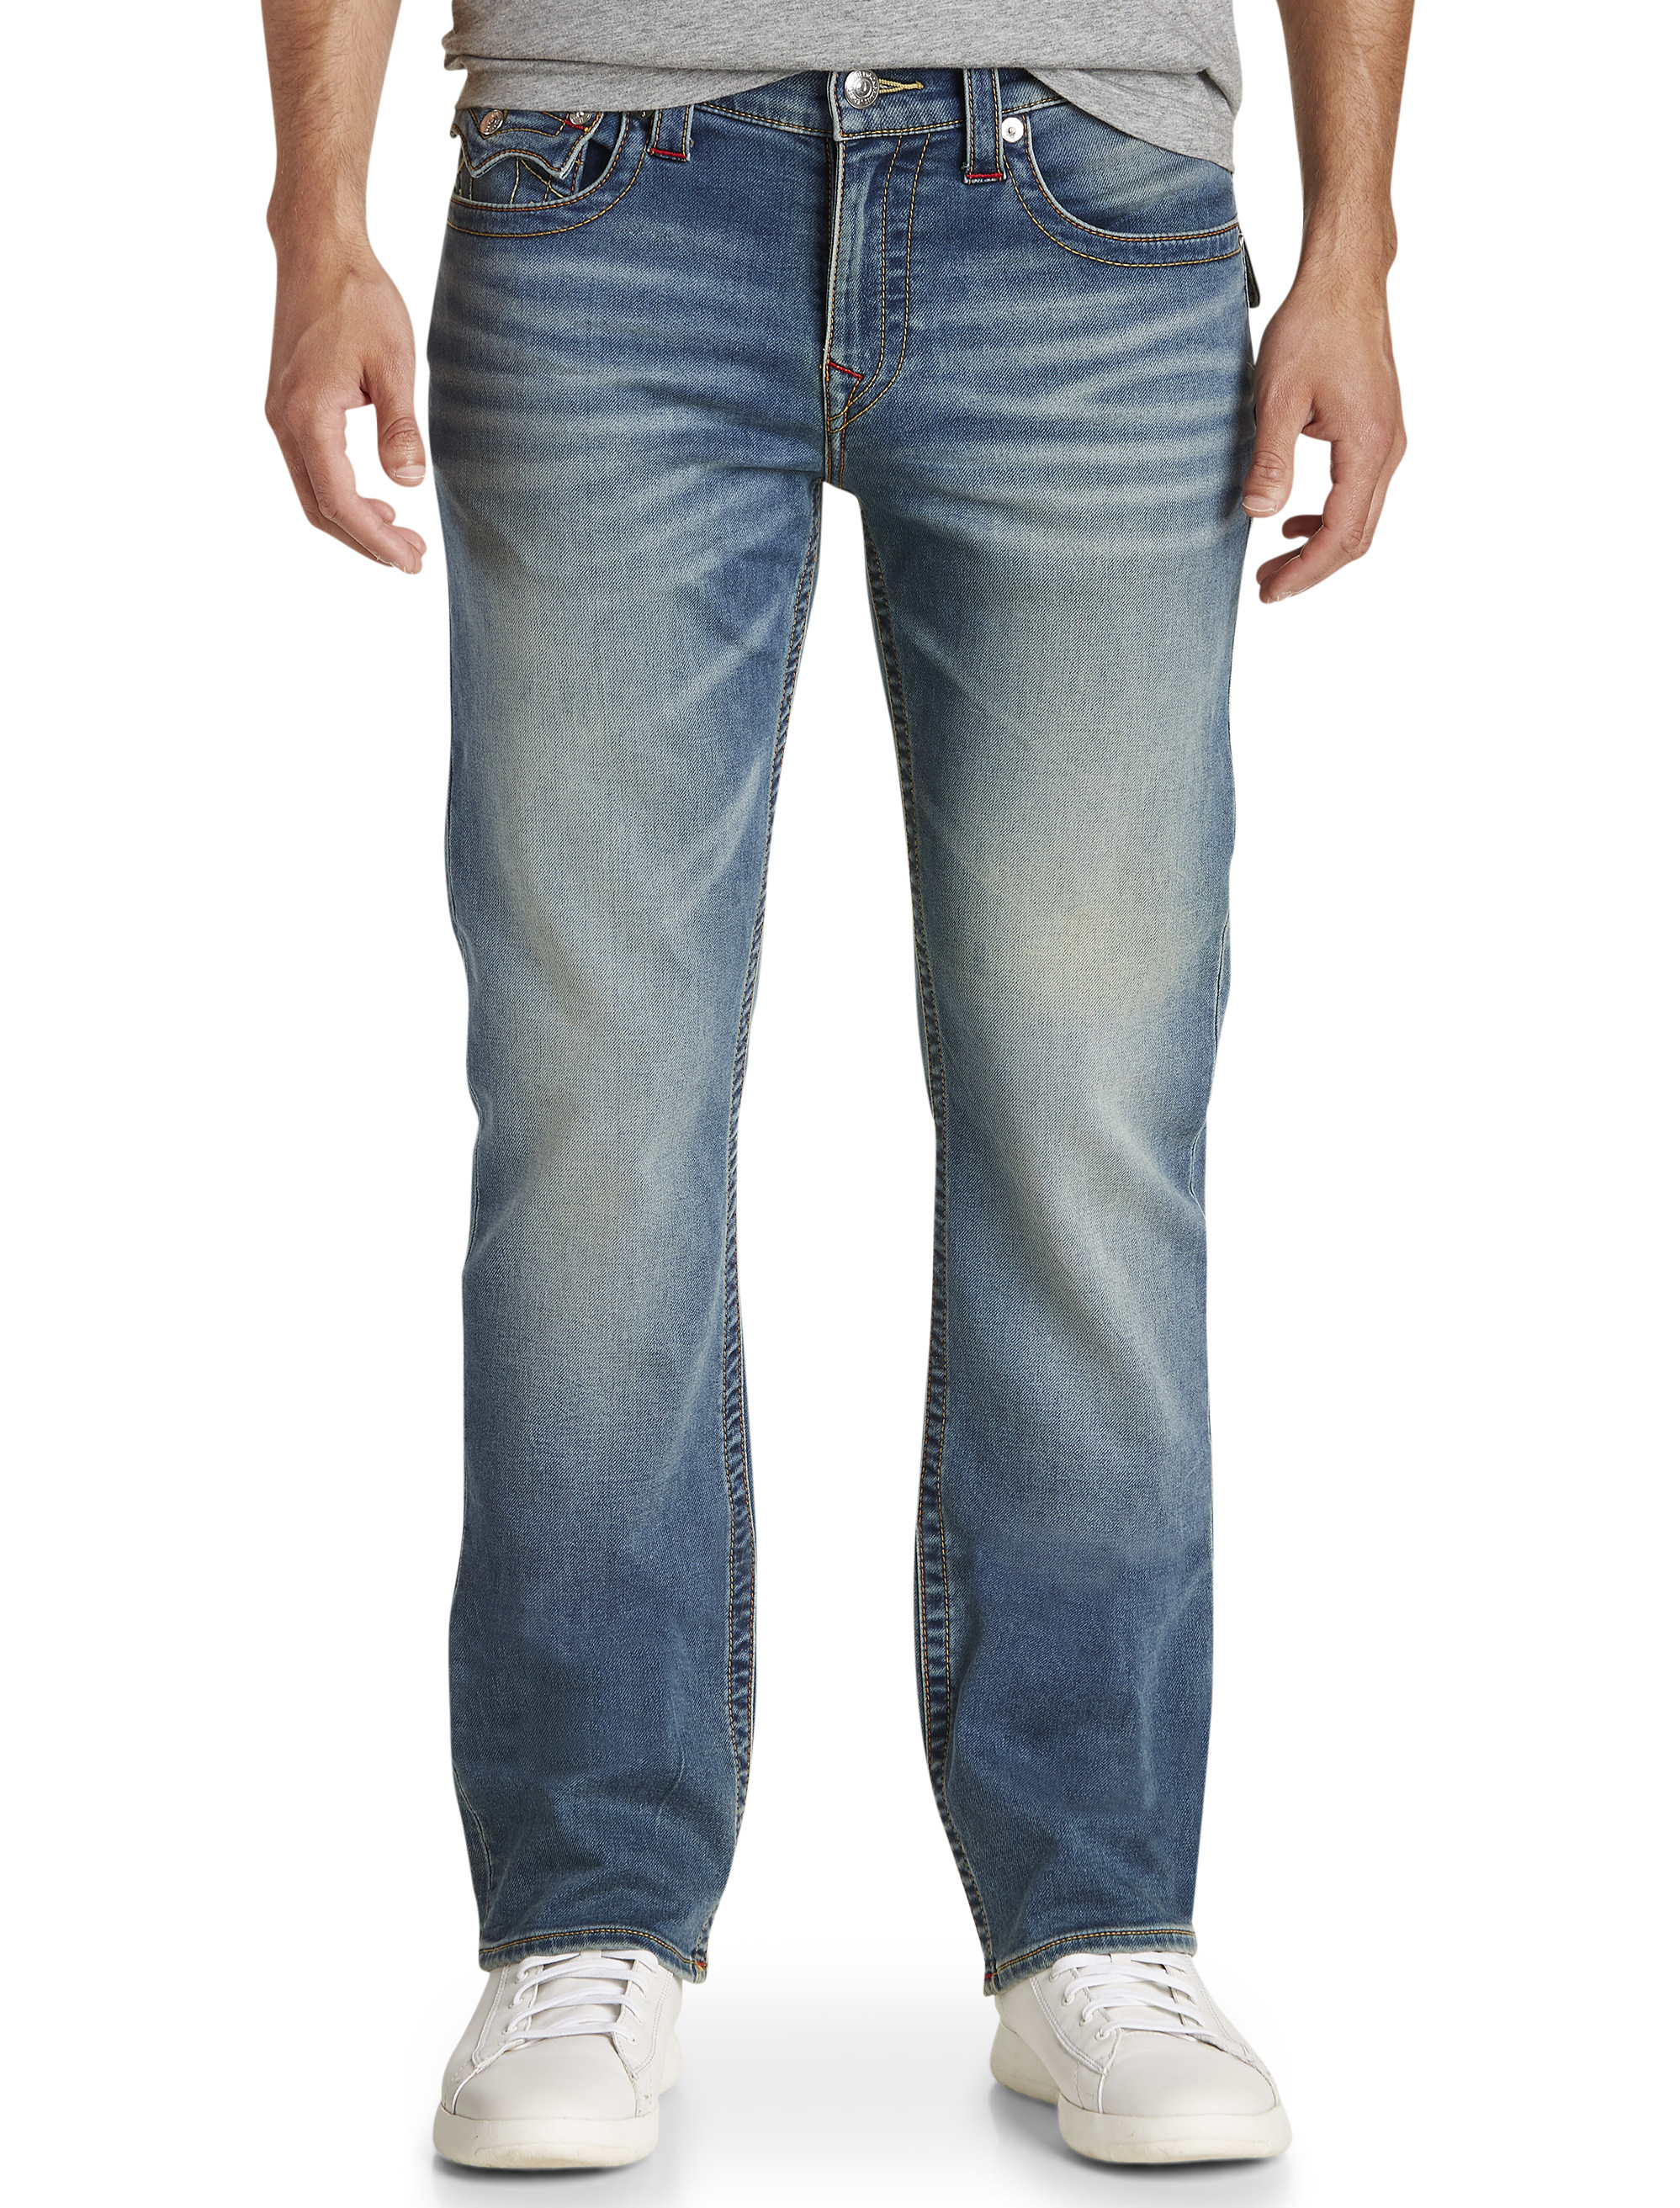 Mens Big and Tall Jeans | DXL